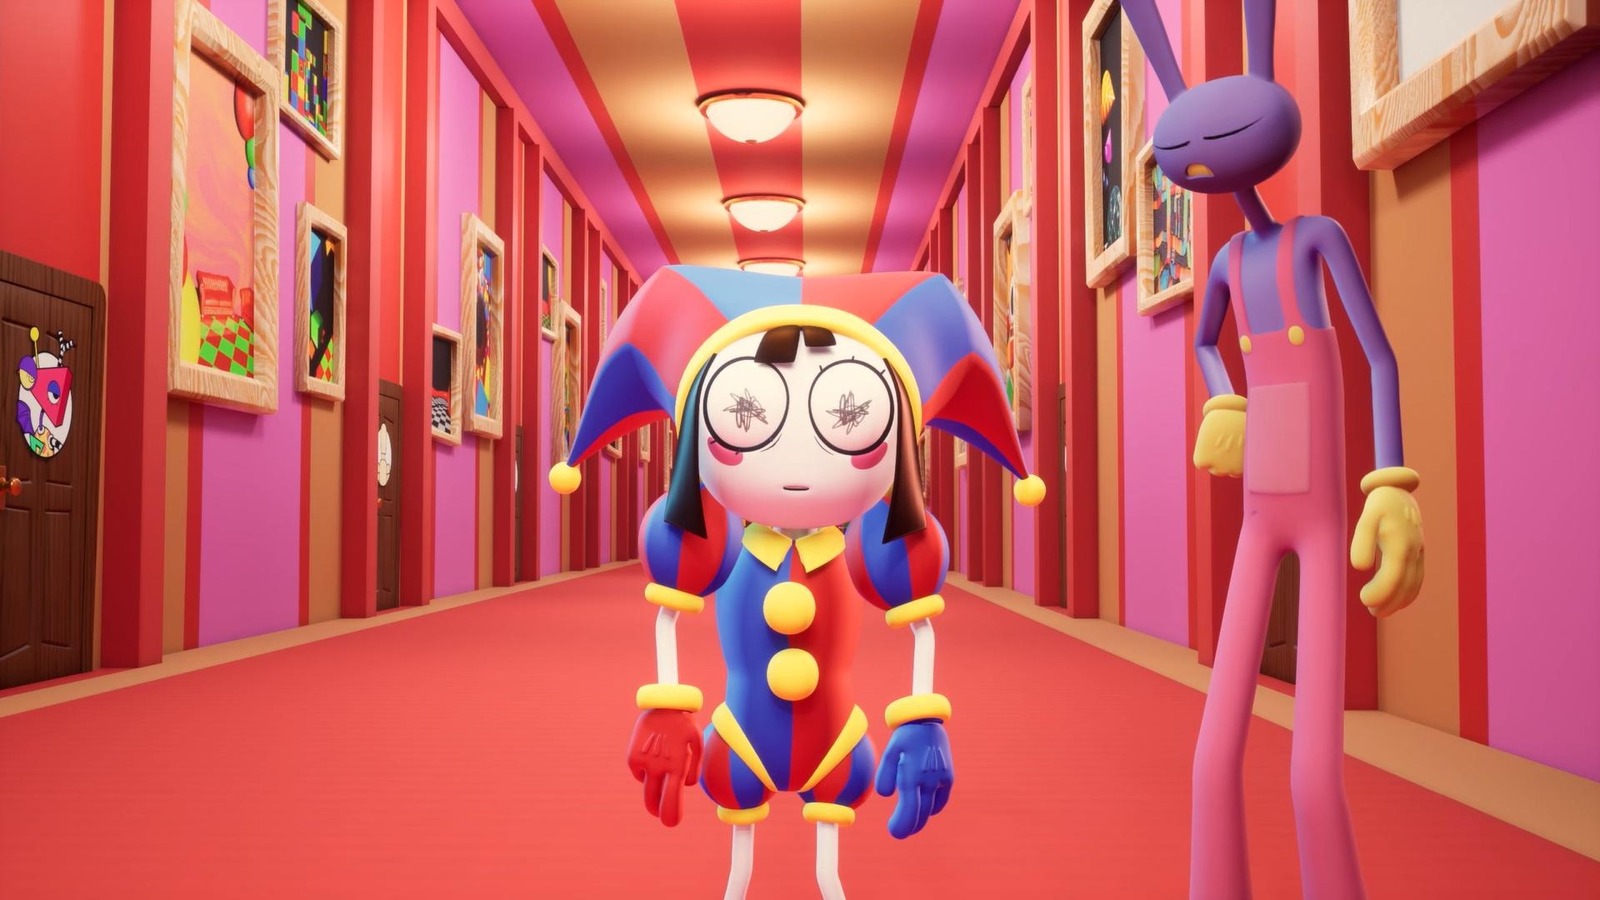 The Amazing Digital Circus' Inspiration Is A Deeply Disturbing Story